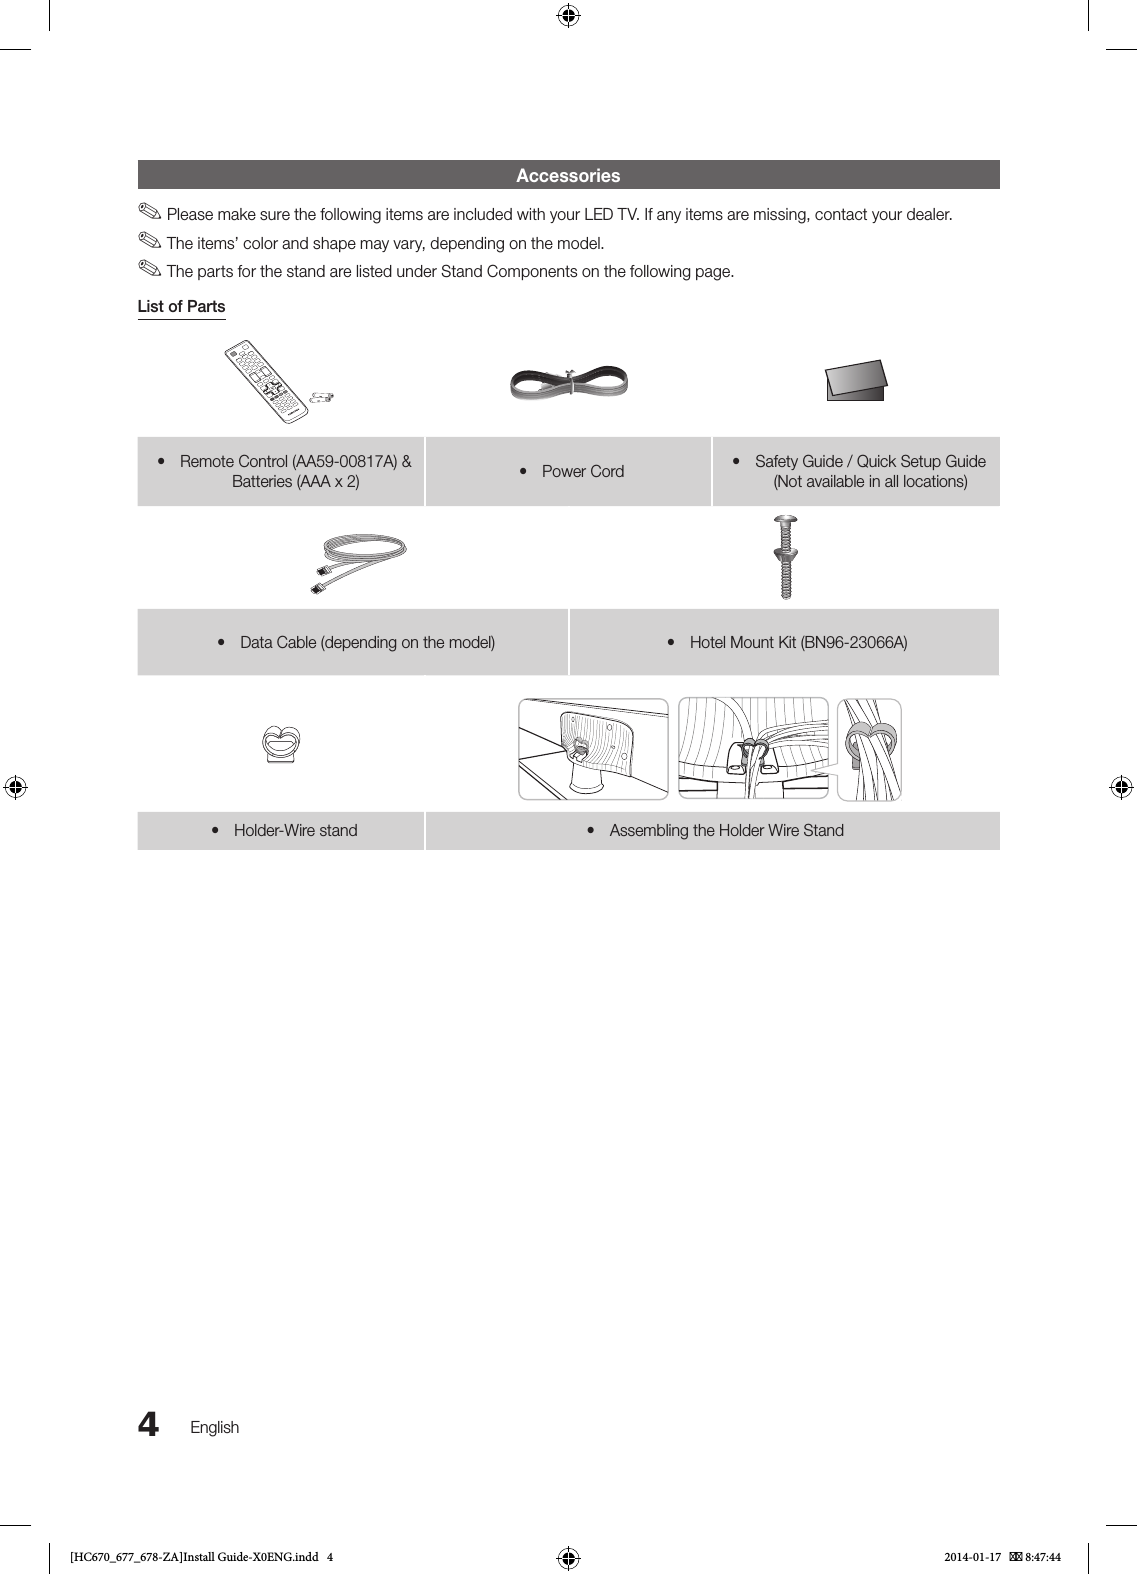 4EnglishAccessories ✎Please make sure the following items are included with your LED TV. If any items are missing, contact your dealer. ✎The items’ color and shape may vary, depending on the model. ✎The parts for the stand are listed under Stand Components on the following page.List of Parts yRemote Control (AA59-00817A) &amp; Batteries (AAA x 2)  yPower Cord  ySafety Guide / Quick Setup Guide (Not available in all locations) yData Cable (depending on the model)  yHotel Mount Kit (BN96-23066A) yHolder-Wire stand  yAssembling the Holder Wire Stand[HC670_677_678-ZA]Install Guide-X0ENG.indd   4 2014-01-17    8:47:44